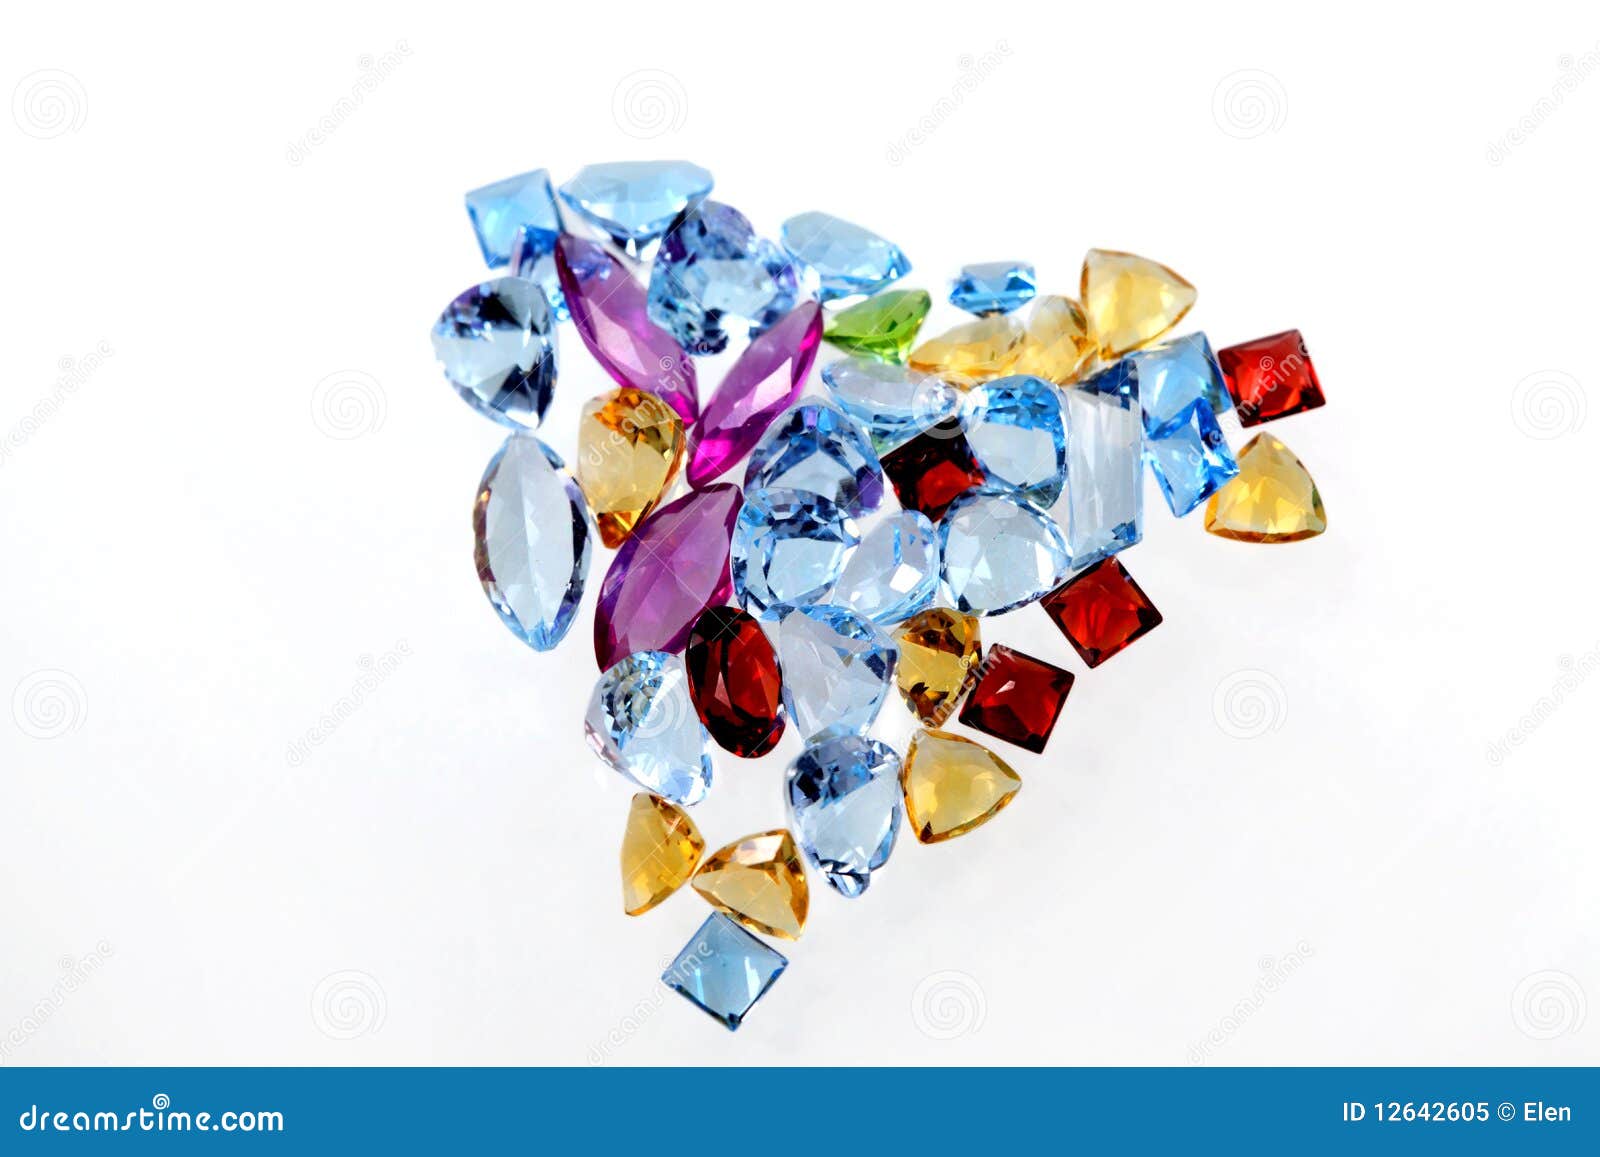 Glass Gems Crafting On White Background Stock Photo 1269951433